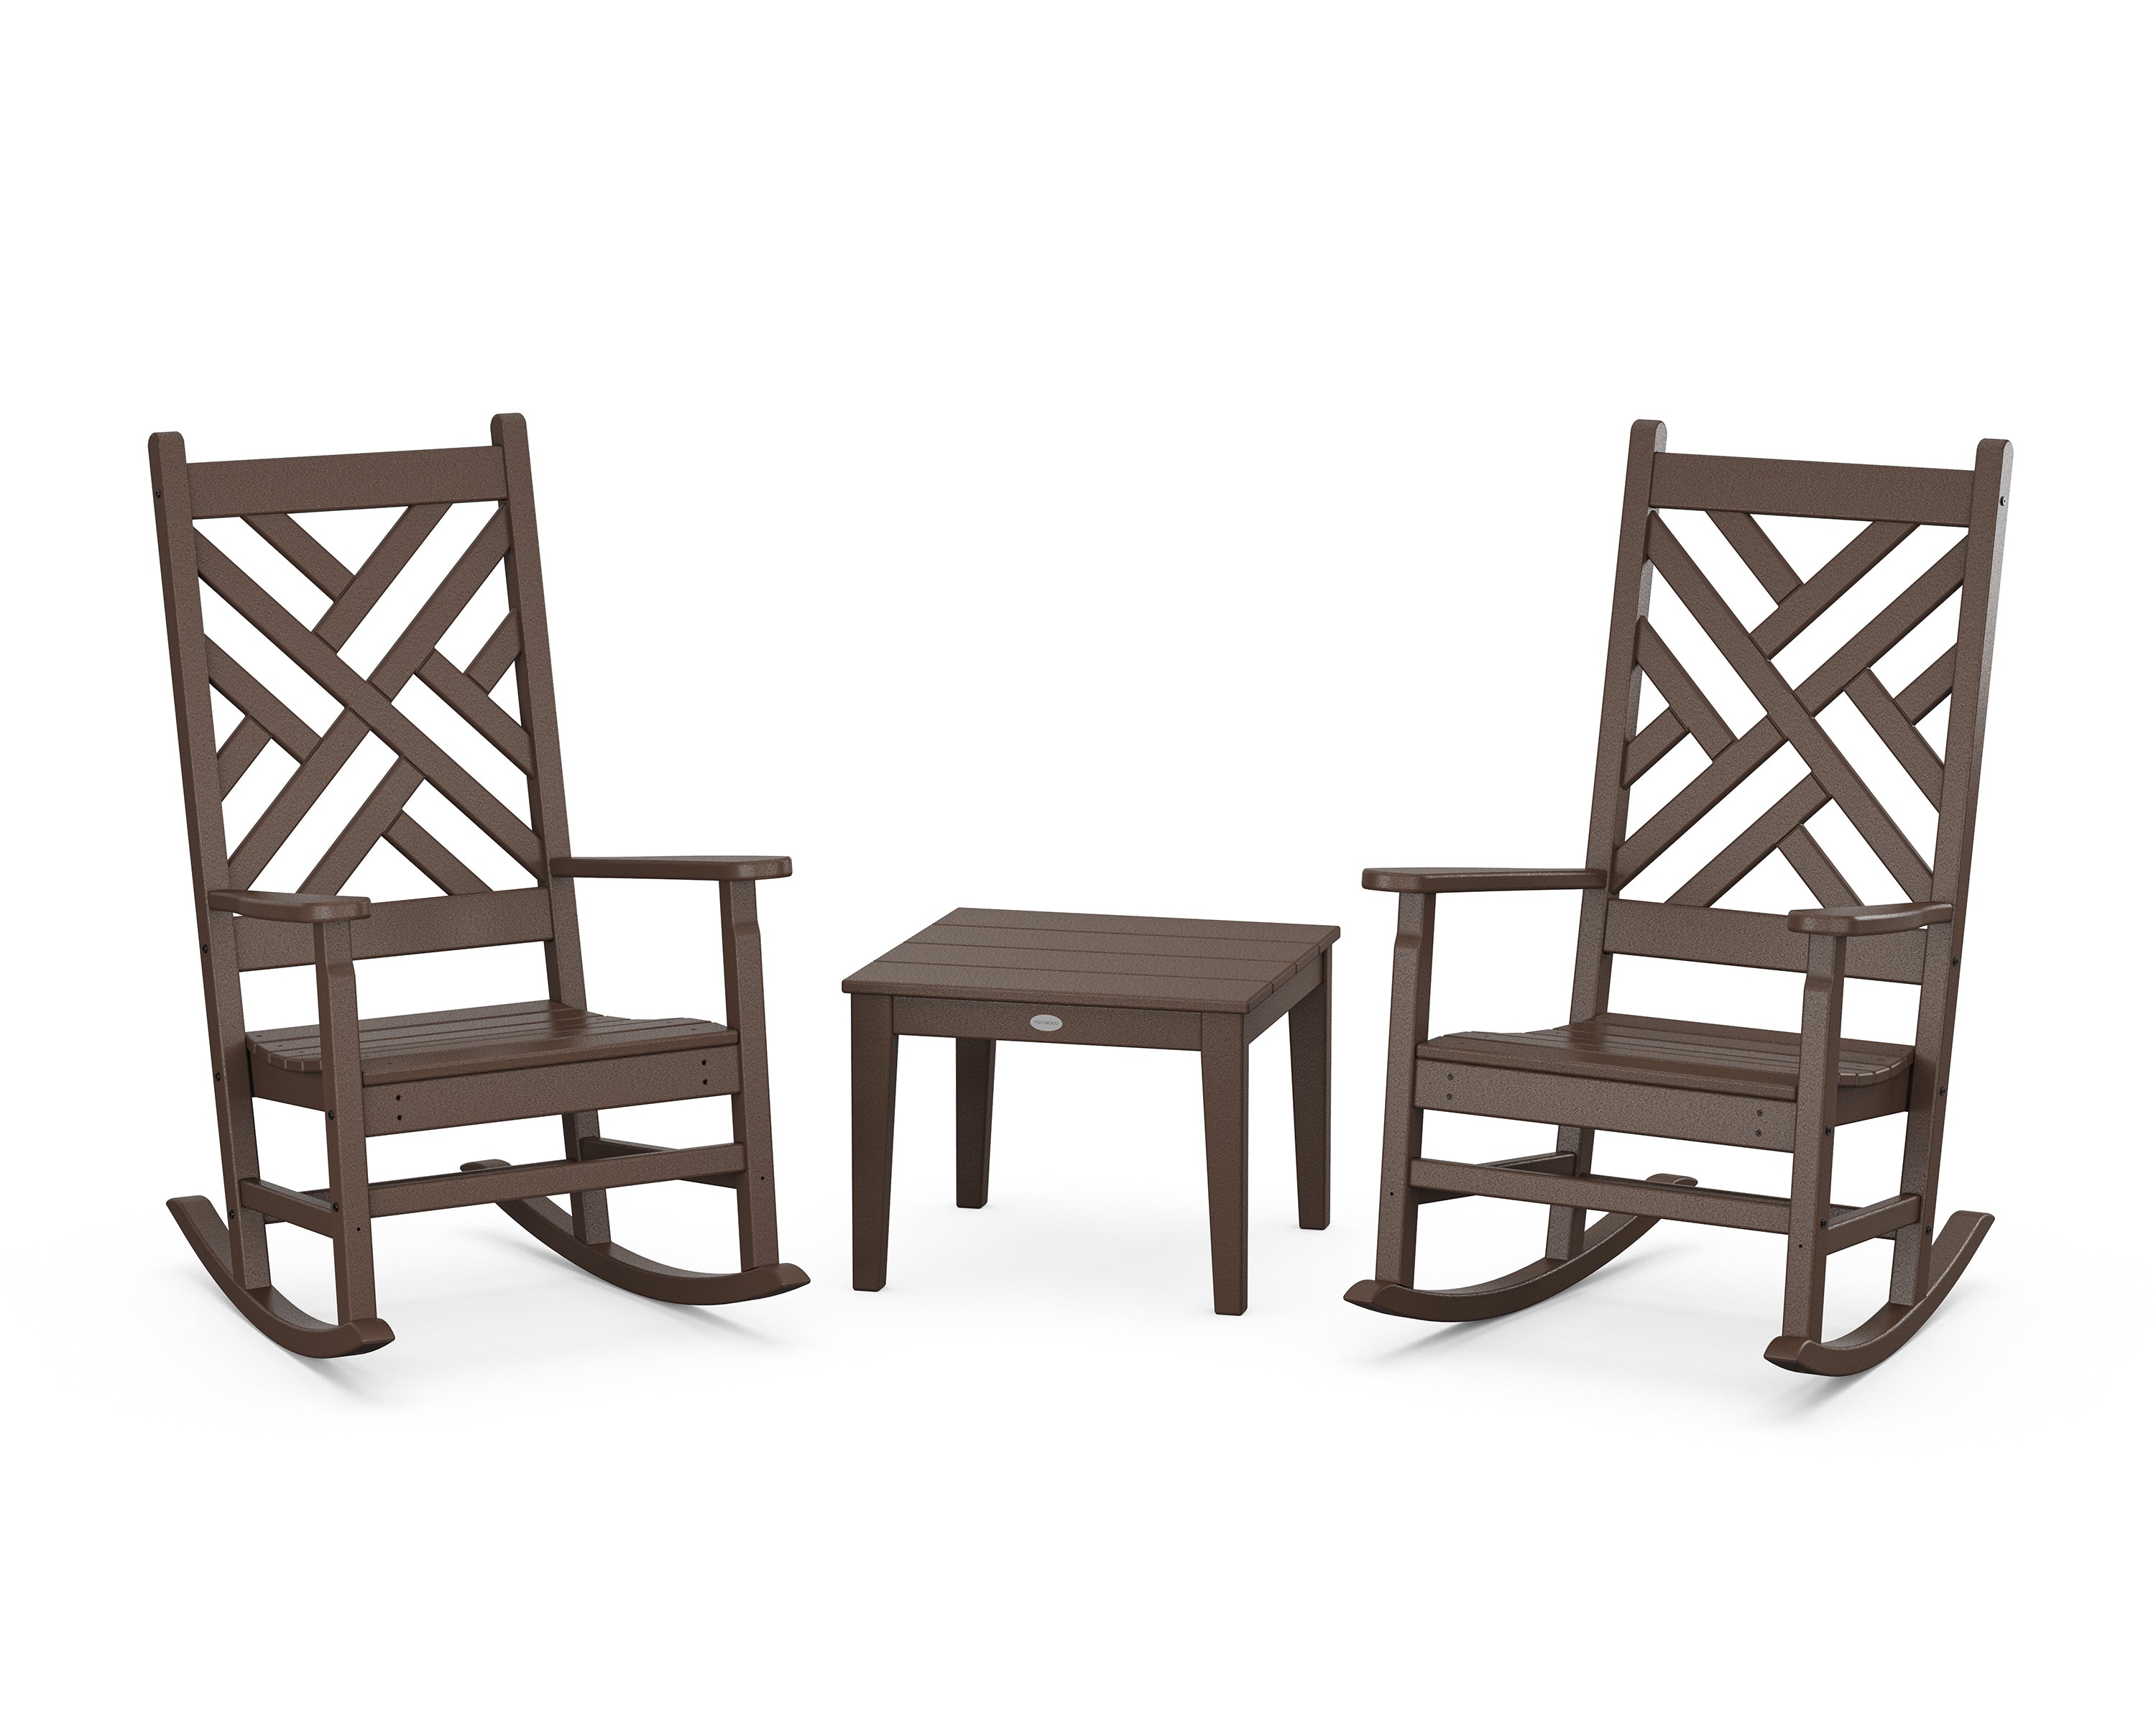 POLYWOOD® Chippendale 3-Piece Rocking Chair Set in Mahogany